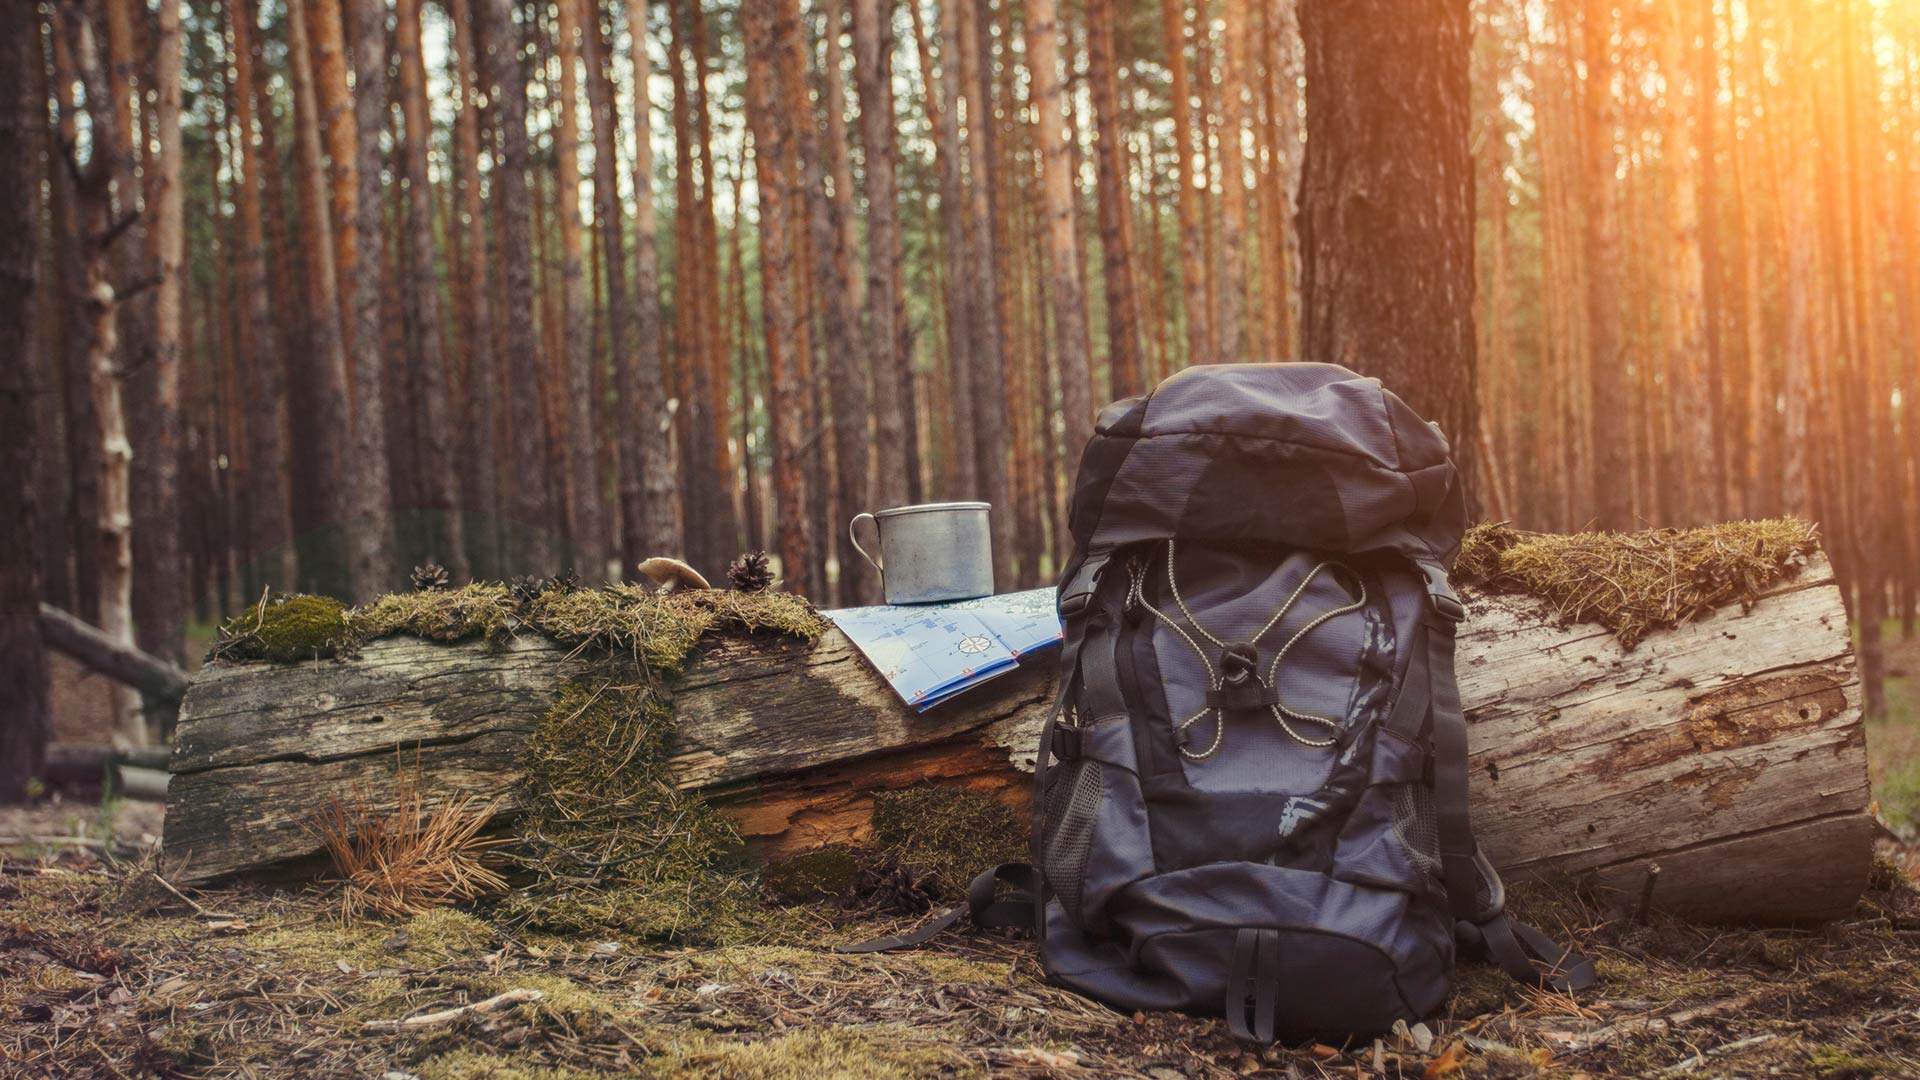 Camping 101: Do’s and don’ts during your first time venturing outdoors